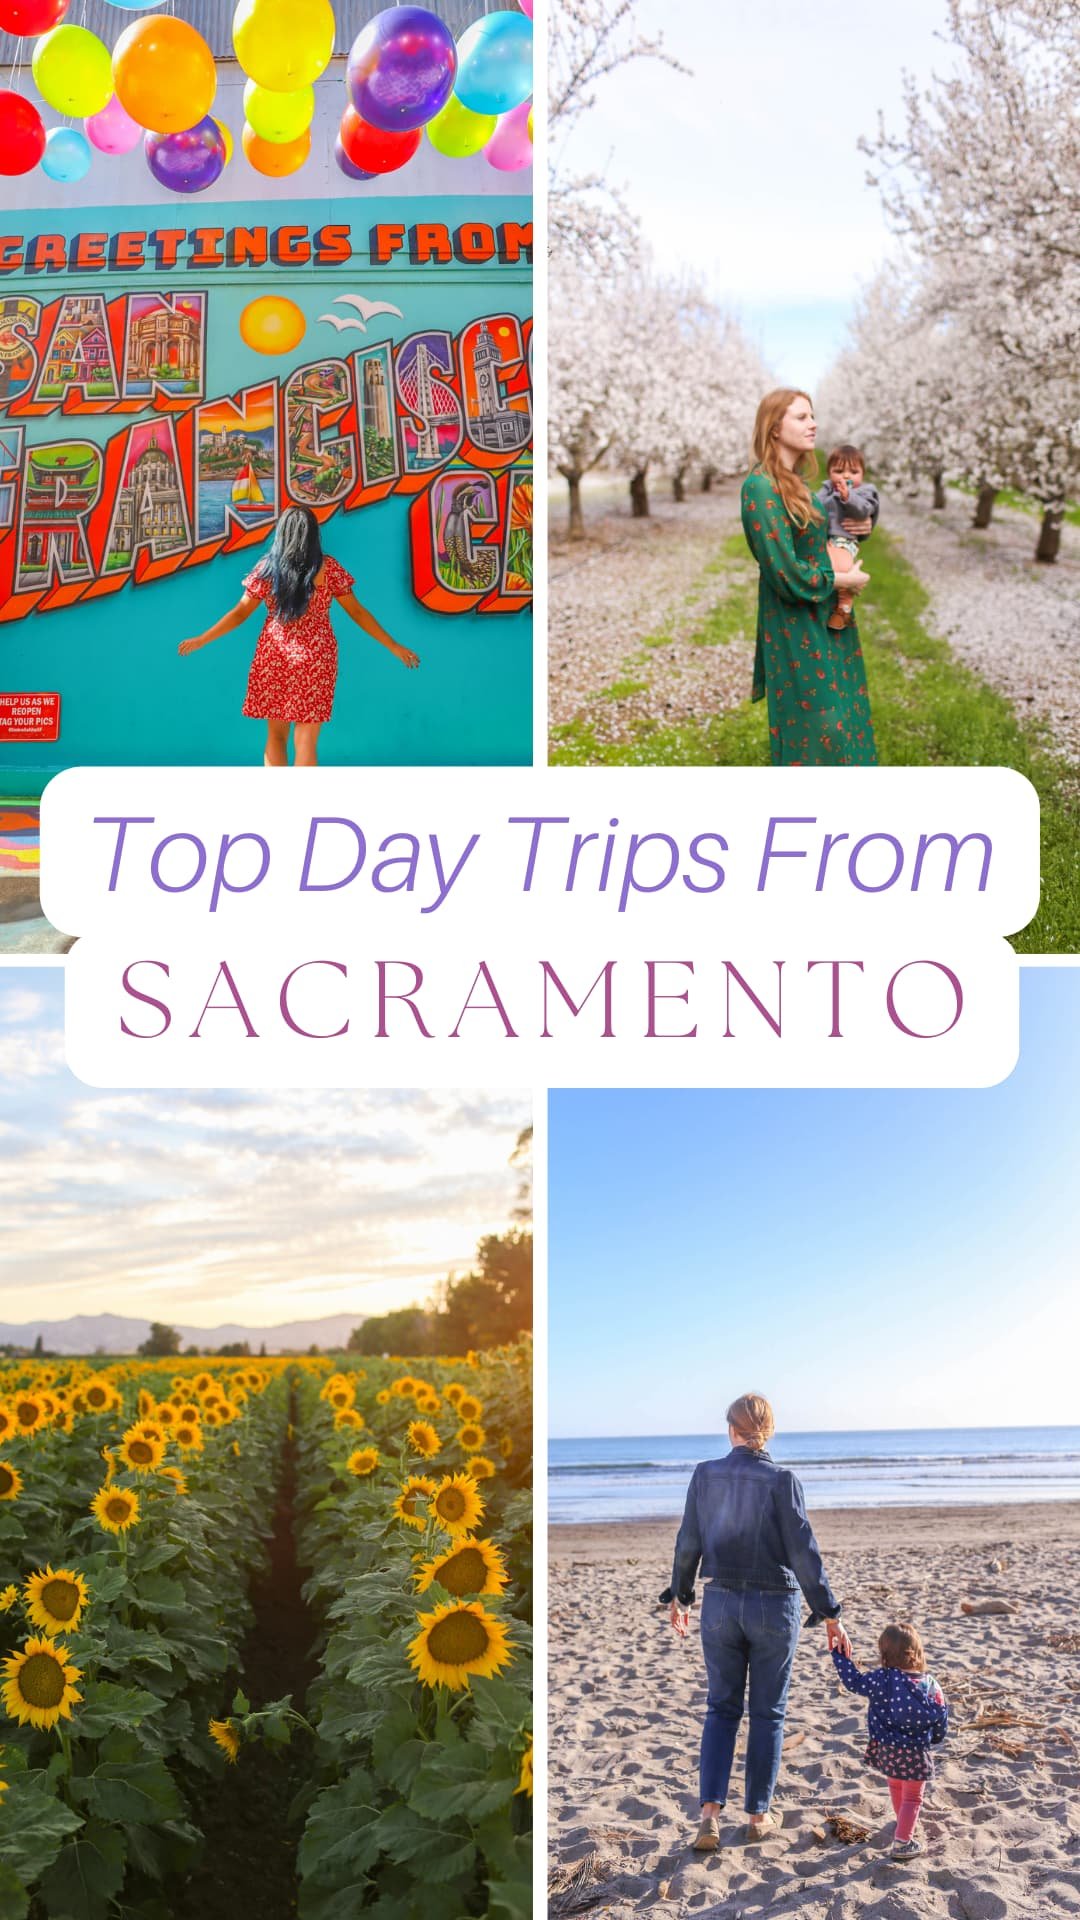 Top 10 Day Trips From Sacramento